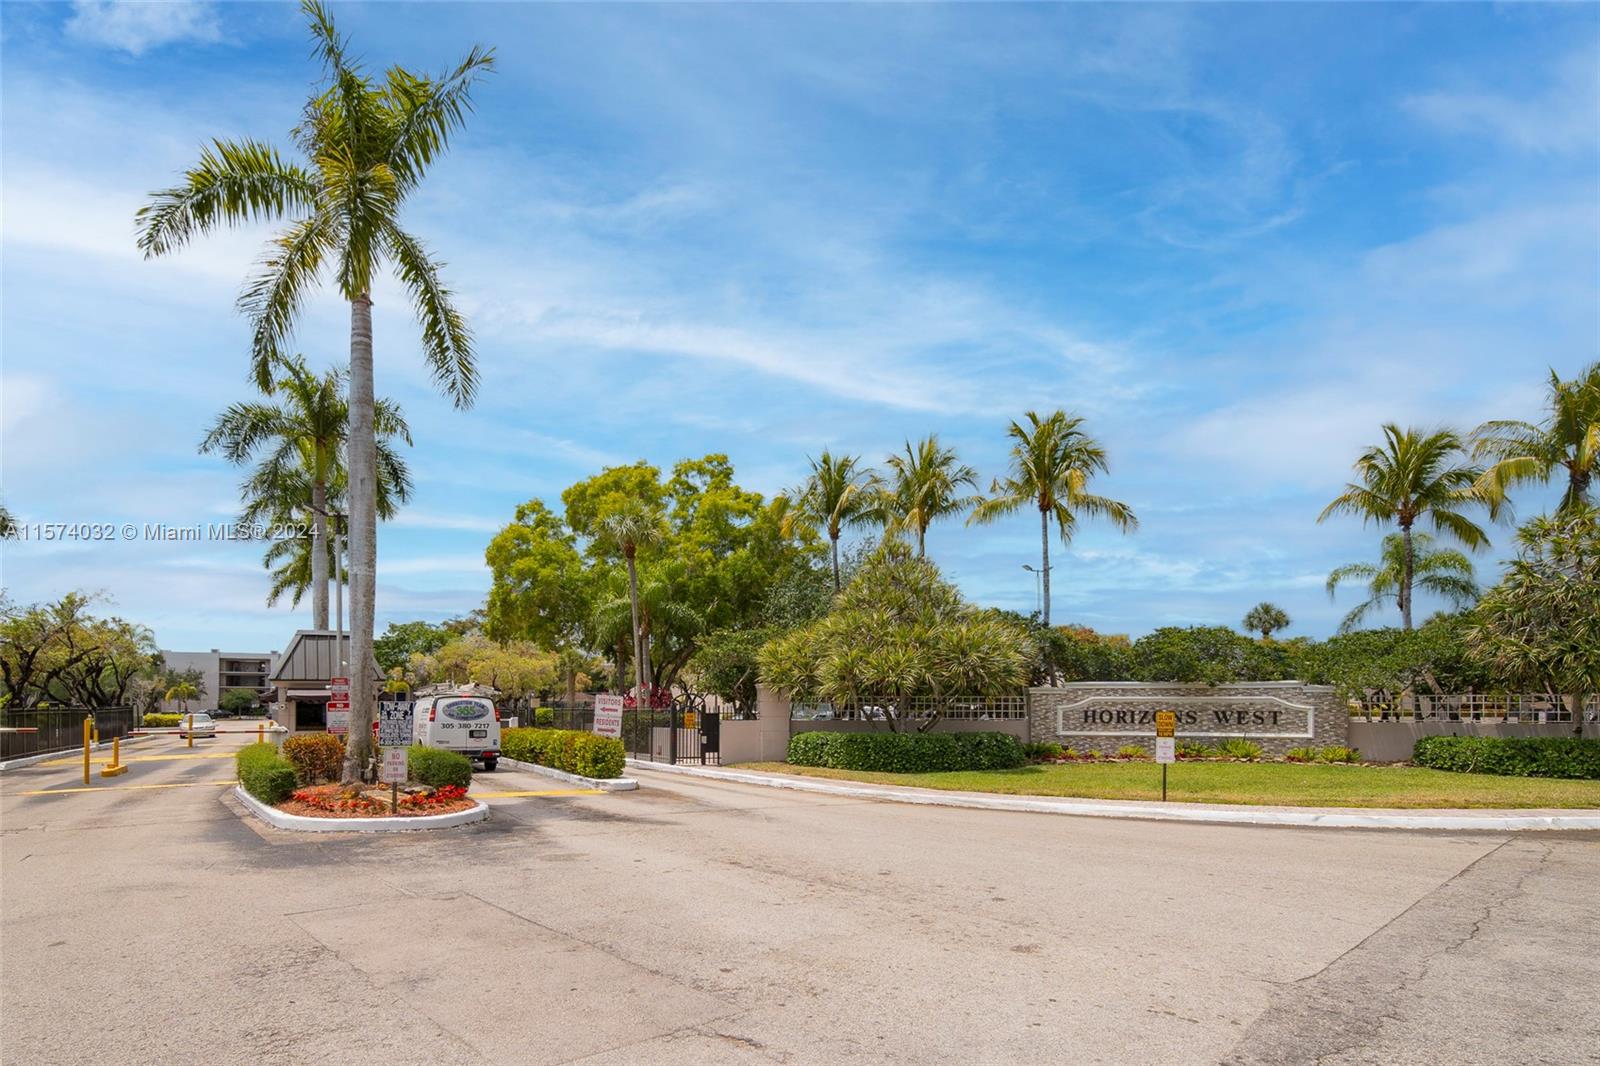 8760 SW 133rd Ave Rd 215, Miami, Florida 33183, 2 Bedrooms Bedrooms, ,2 BathroomsBathrooms,Residential,For Sale,8760 SW 133rd Ave Rd 215,A11574032